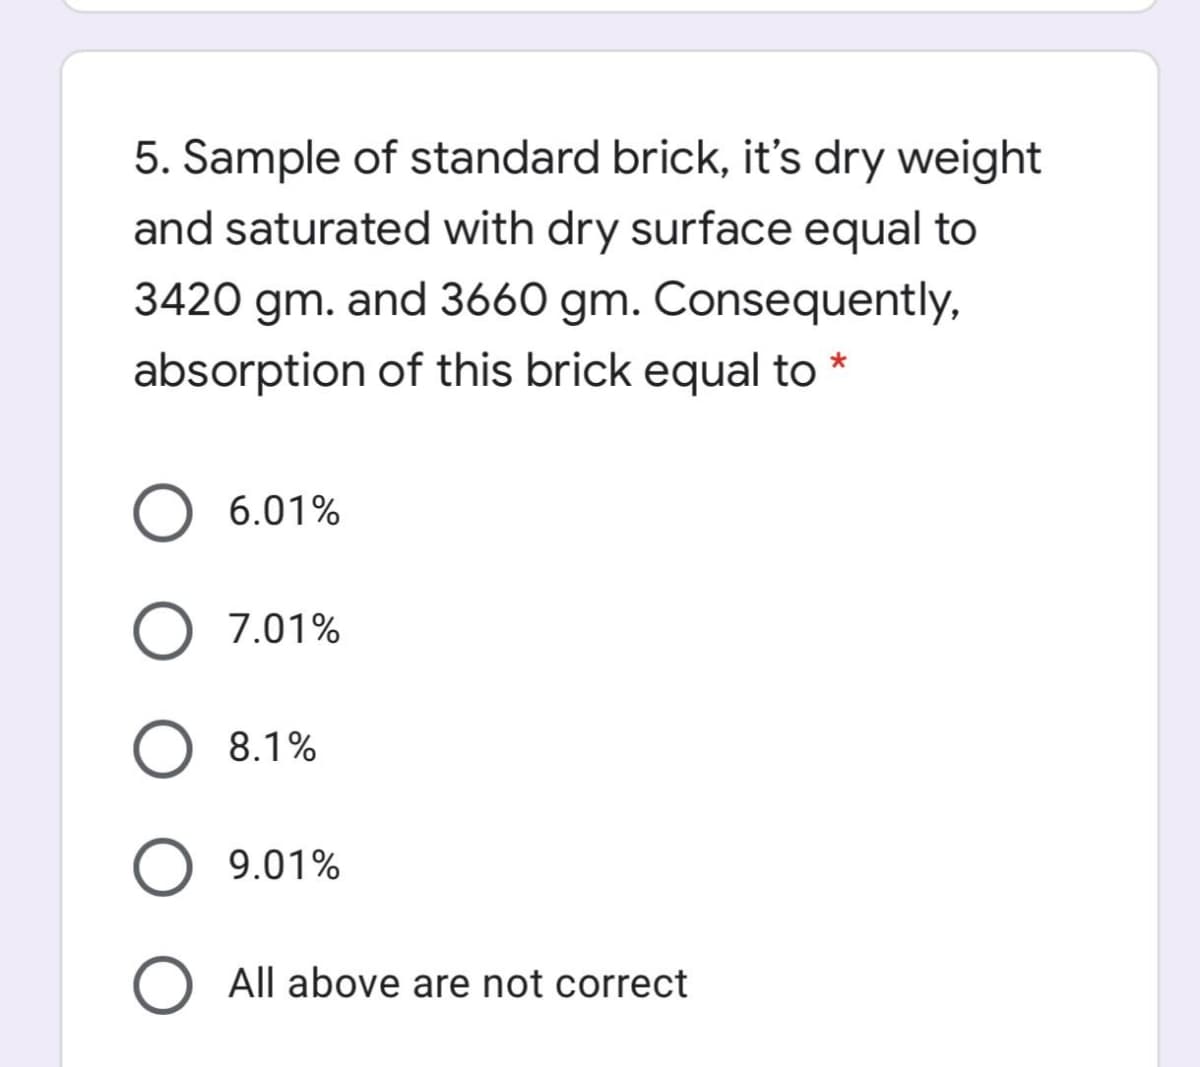 5. Sample of standard brick, it's dry weight
and saturated with dry surface equal to
3420 gm. and 3660 gm. Consequently,
absorption of this brick equal to *
6.01%
7.01%
8.1%
9.01%
All above are not correct
